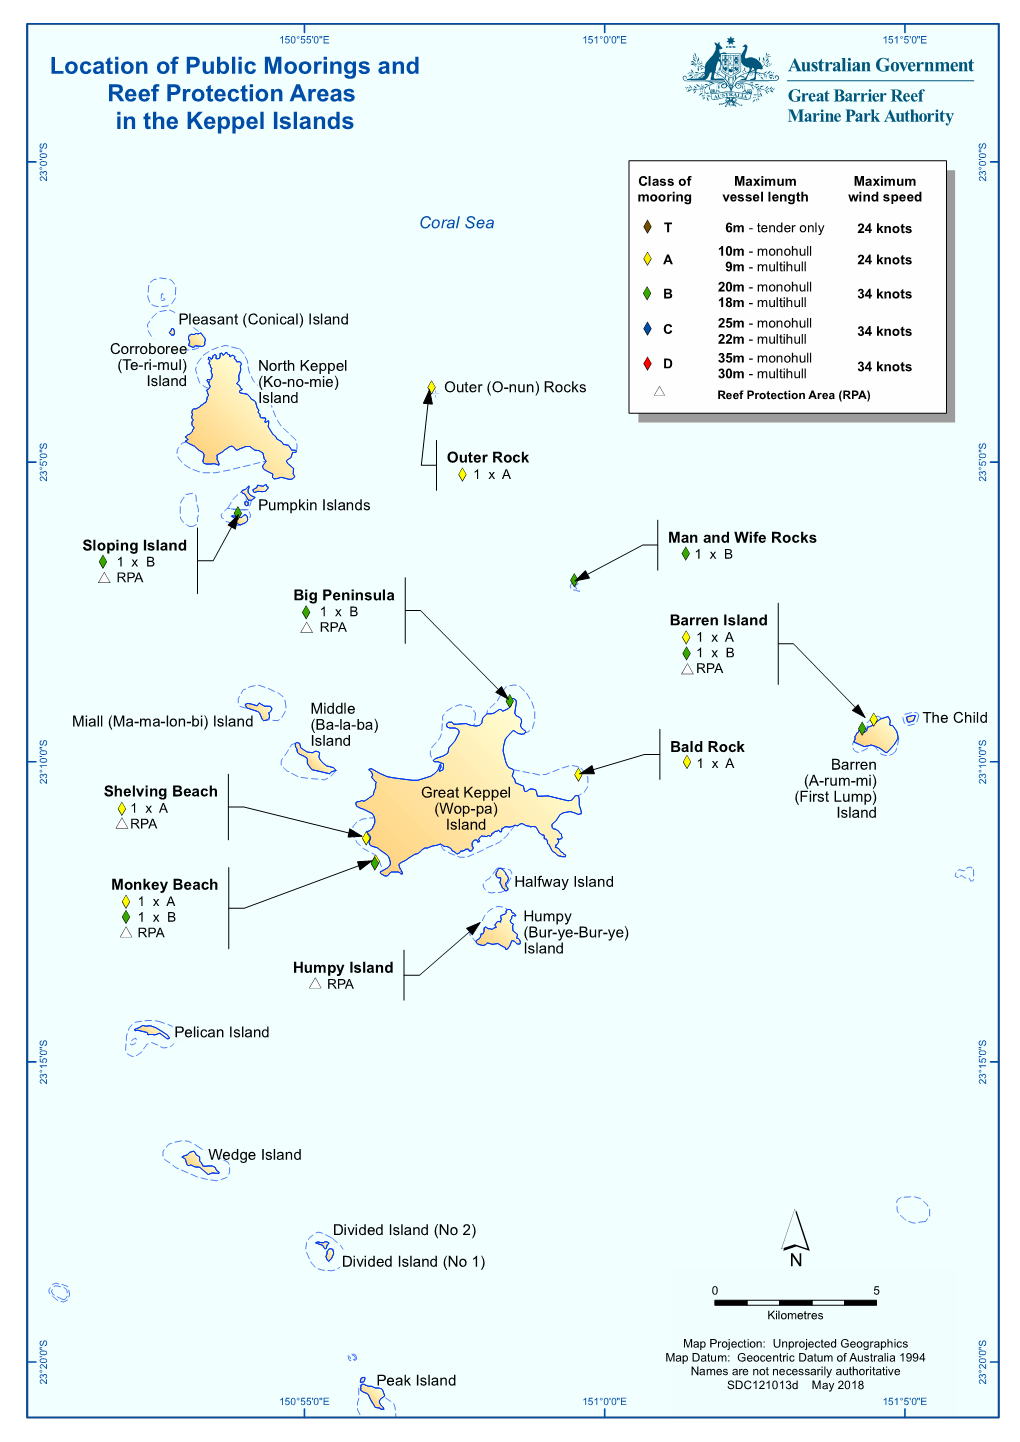 Location of Public Moorings and Reef Protection Areas in the Keppel Islands S S " " 0 0 ' ' ° 0 ° 0 3 3 2 Class of Maximum Maximum 2 Mooring Vessel Length Wind Speed